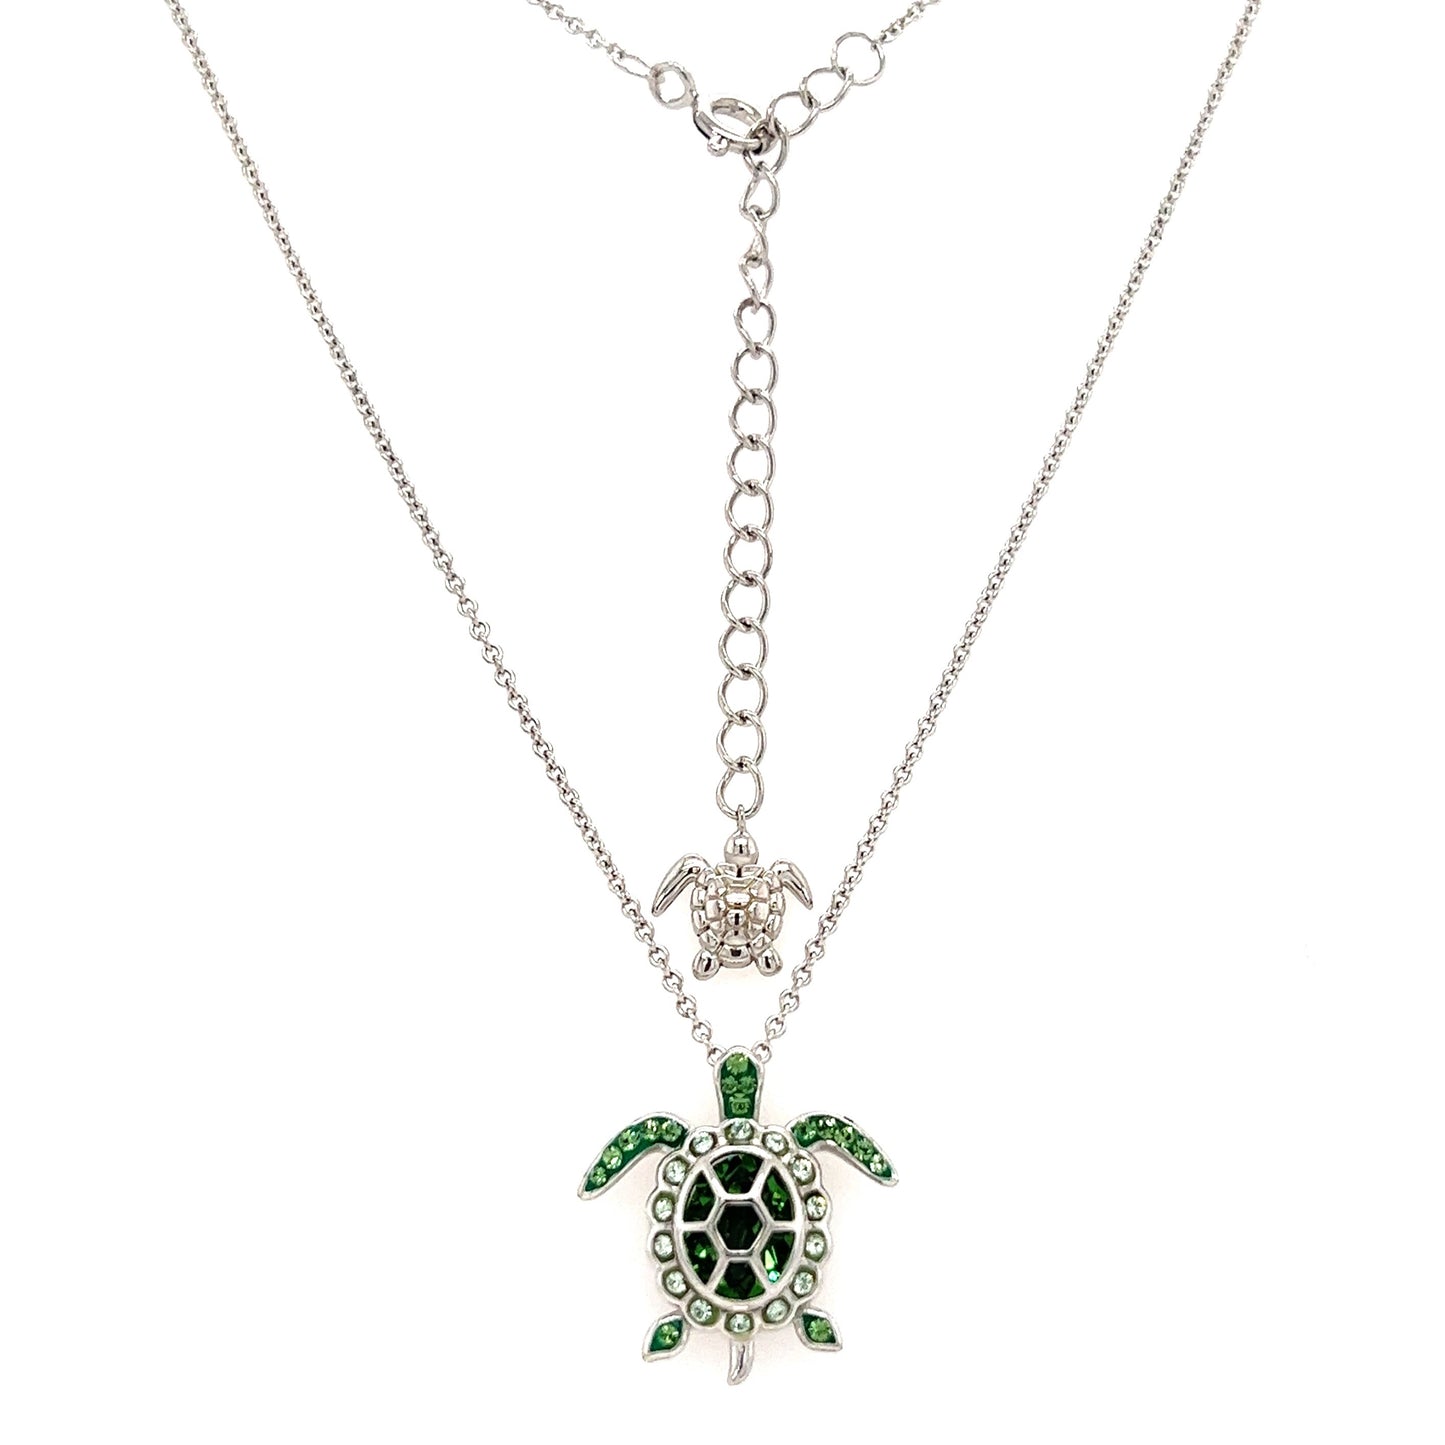 Sea Turtle Necklace with Light Green Crystals in Sterling Silver. Full Necklace Front View.